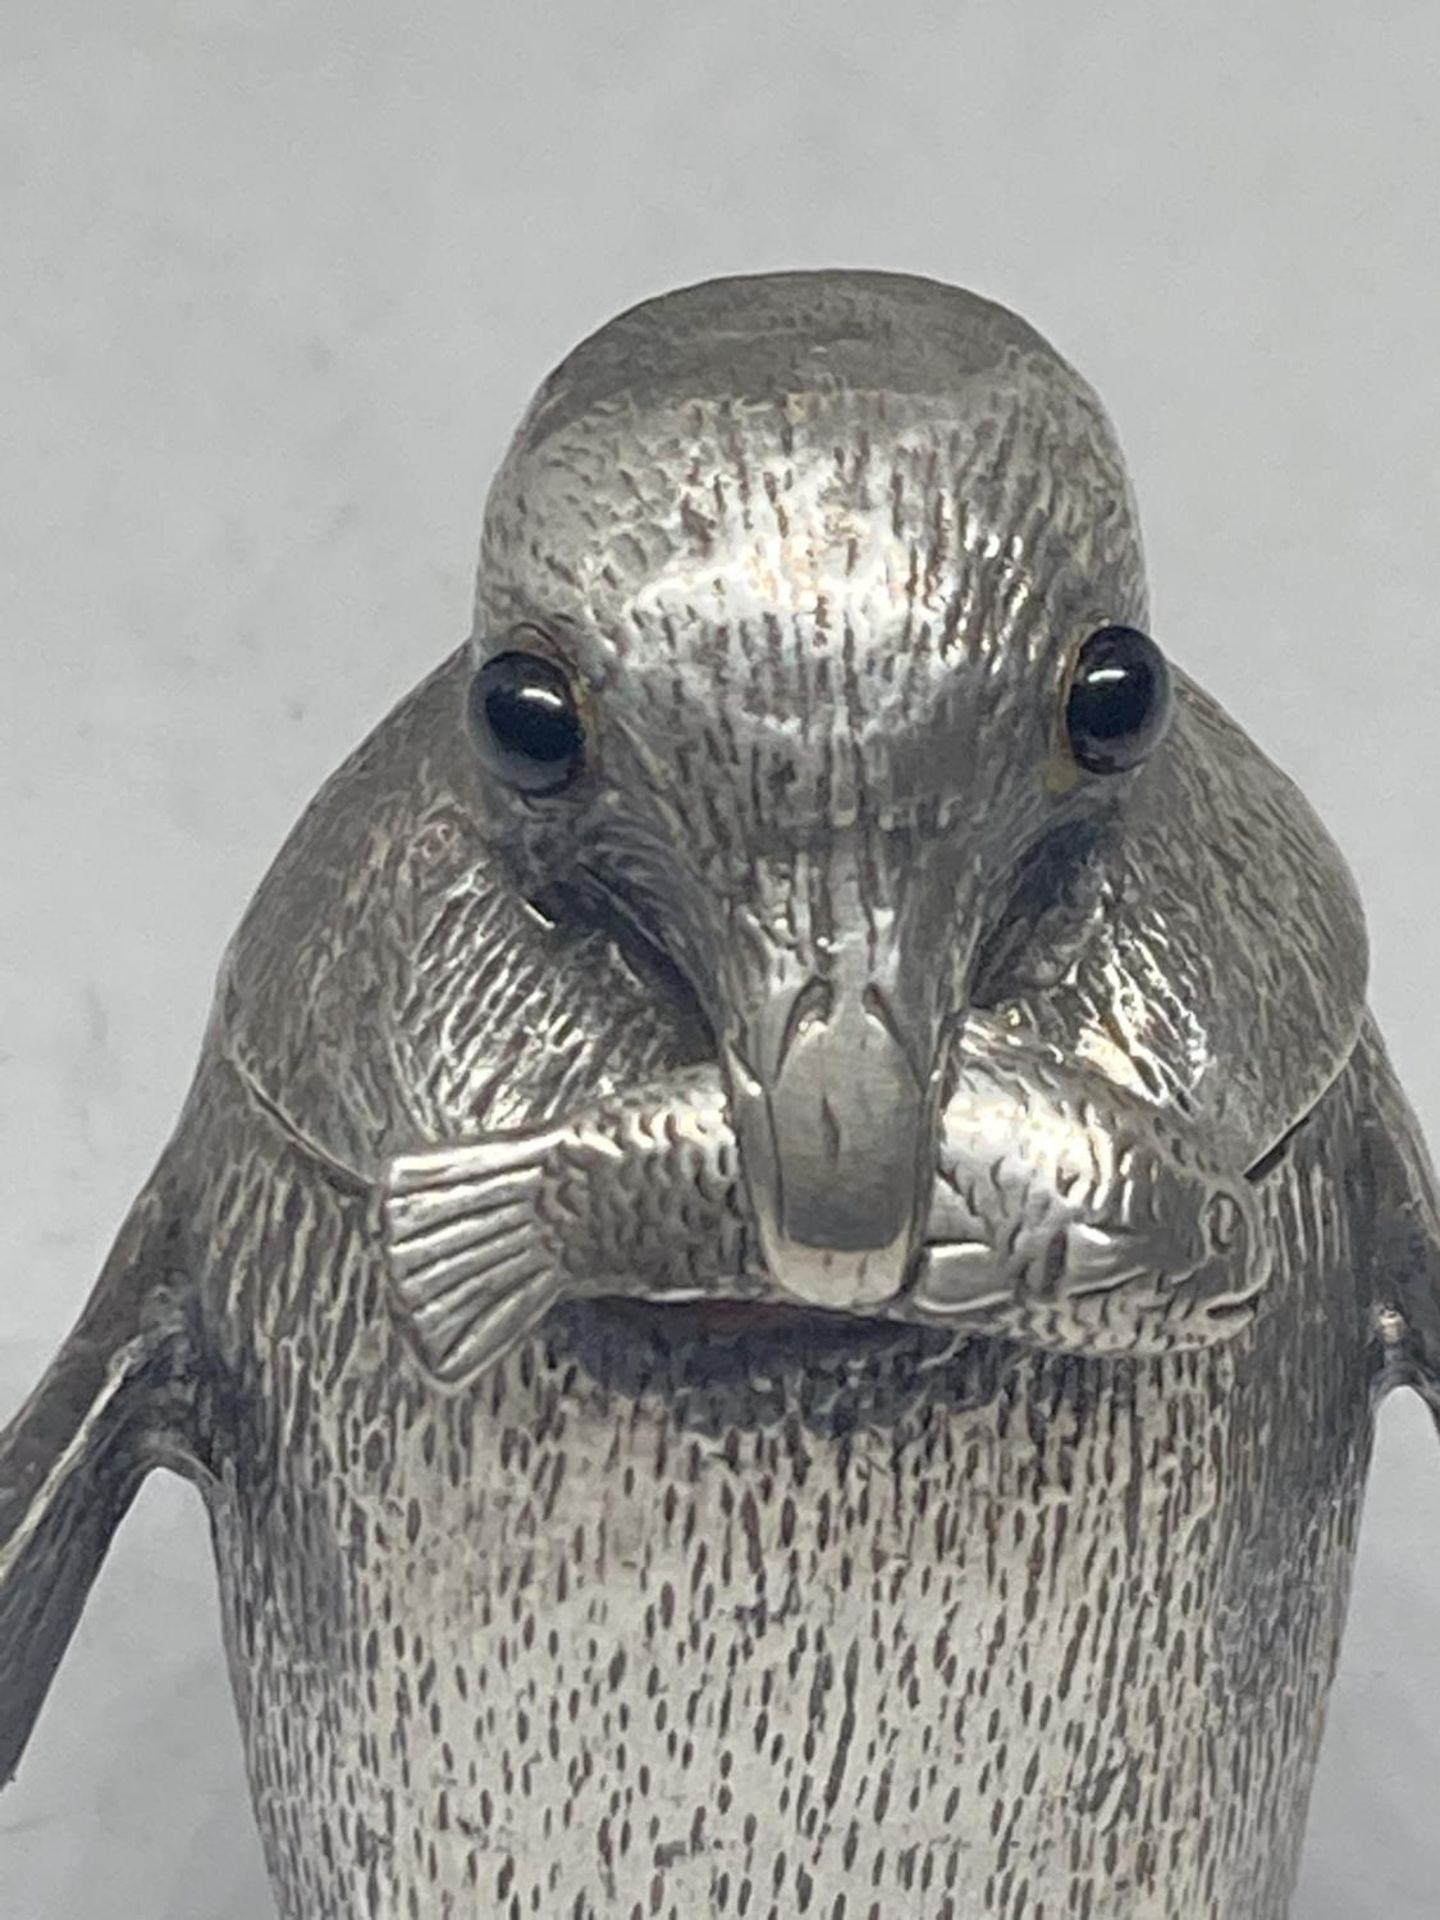 A HALLMARKED LONDON SILVER CRUET SET IN THE FORM OF THREE PENGUINS GROSS WEIGHT 279.3 GRAMS - Image 9 of 11